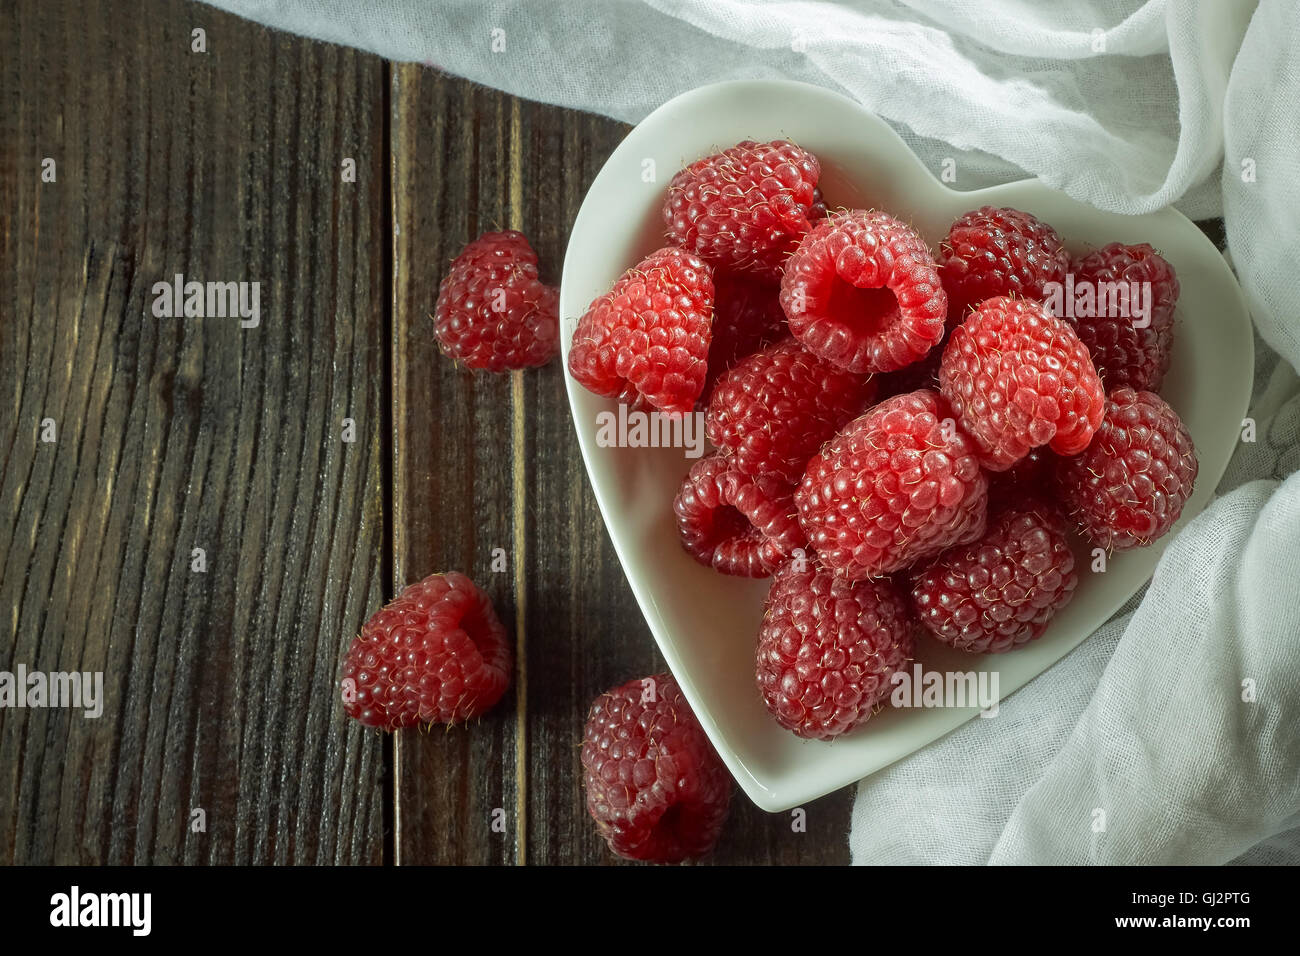 Red raspberries in white ceramic heart shaped bowl on wooden background. Top view with copy space Stock Photo